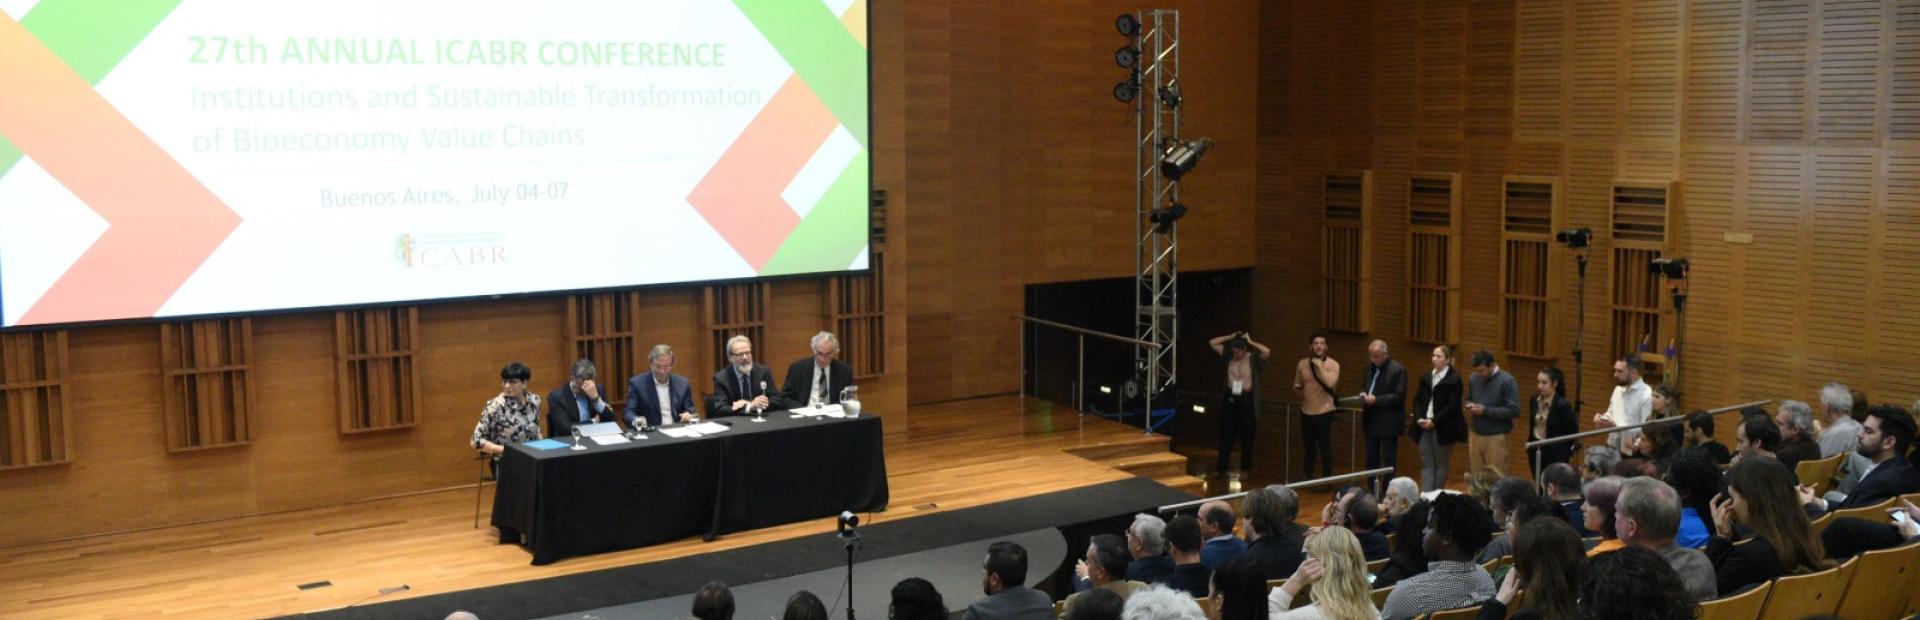 Eminent academics discussed various perspectives on the bioeconomy in the region with representatives from biotechnology, biofuel and bioinput companies, in eight plenary sessions and several workshops.  